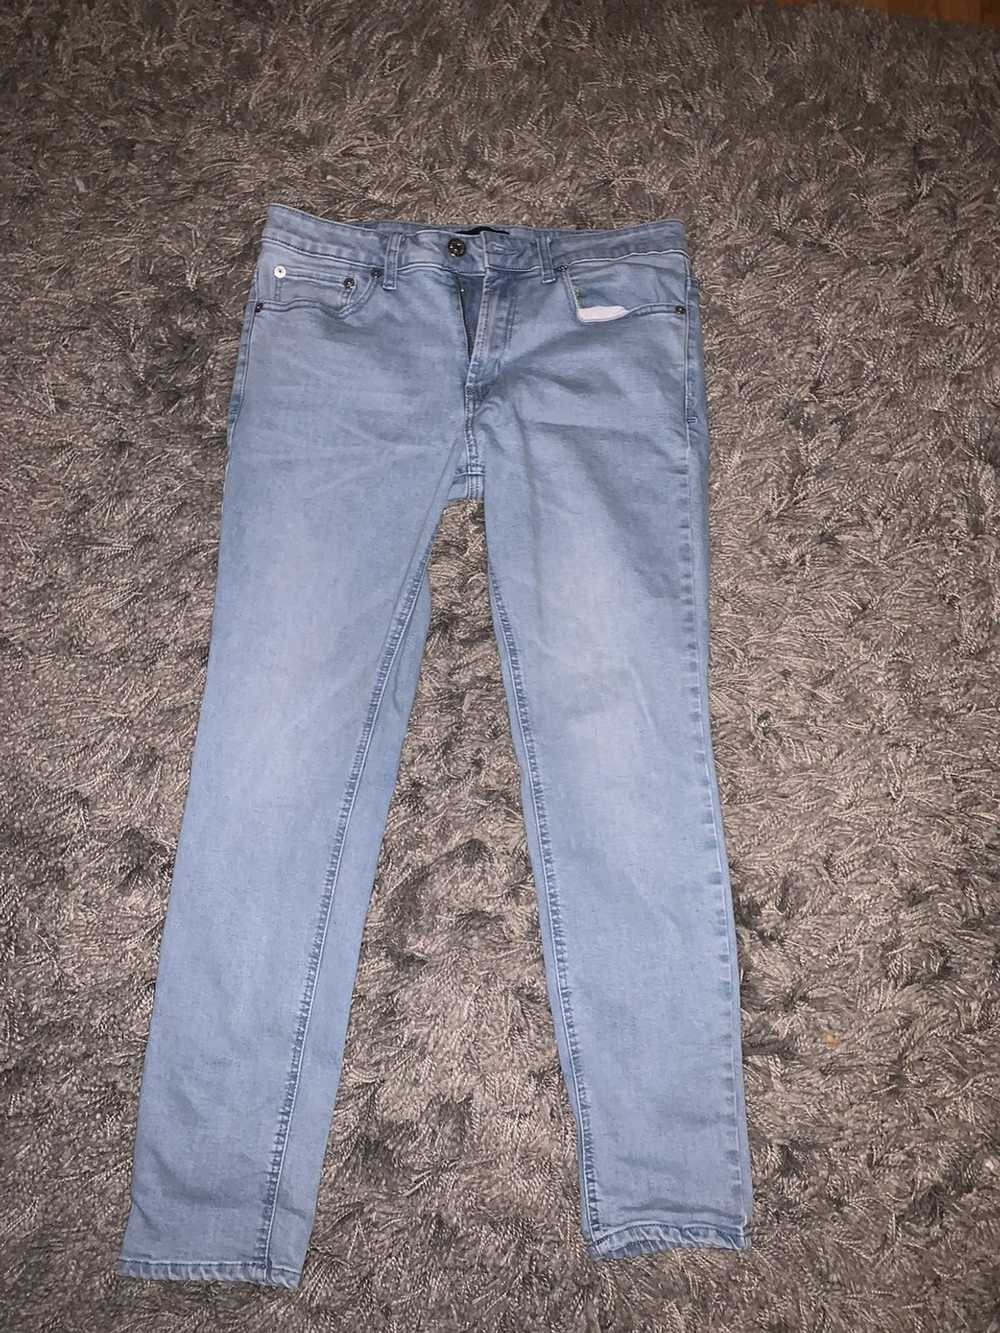 Pacsun Pacsun Active Stretch Skinny Jeans 32x30 - image 1